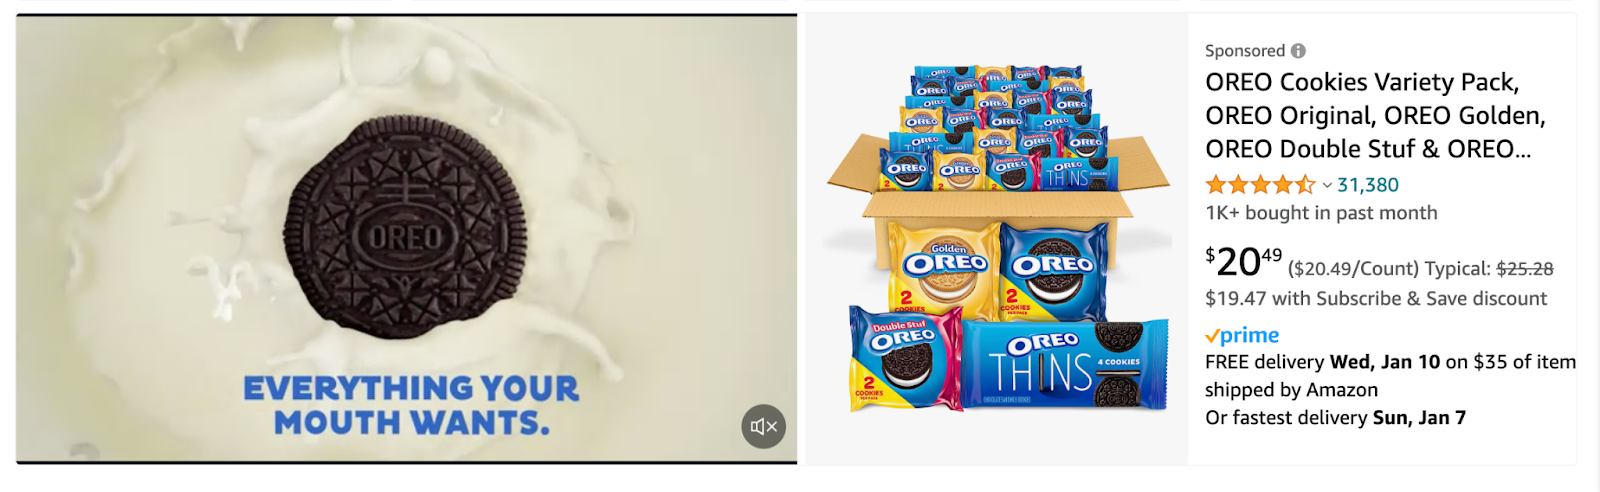 Screenshot of Amazon product listing for Oreos showing a video and a title with high customer ratings.